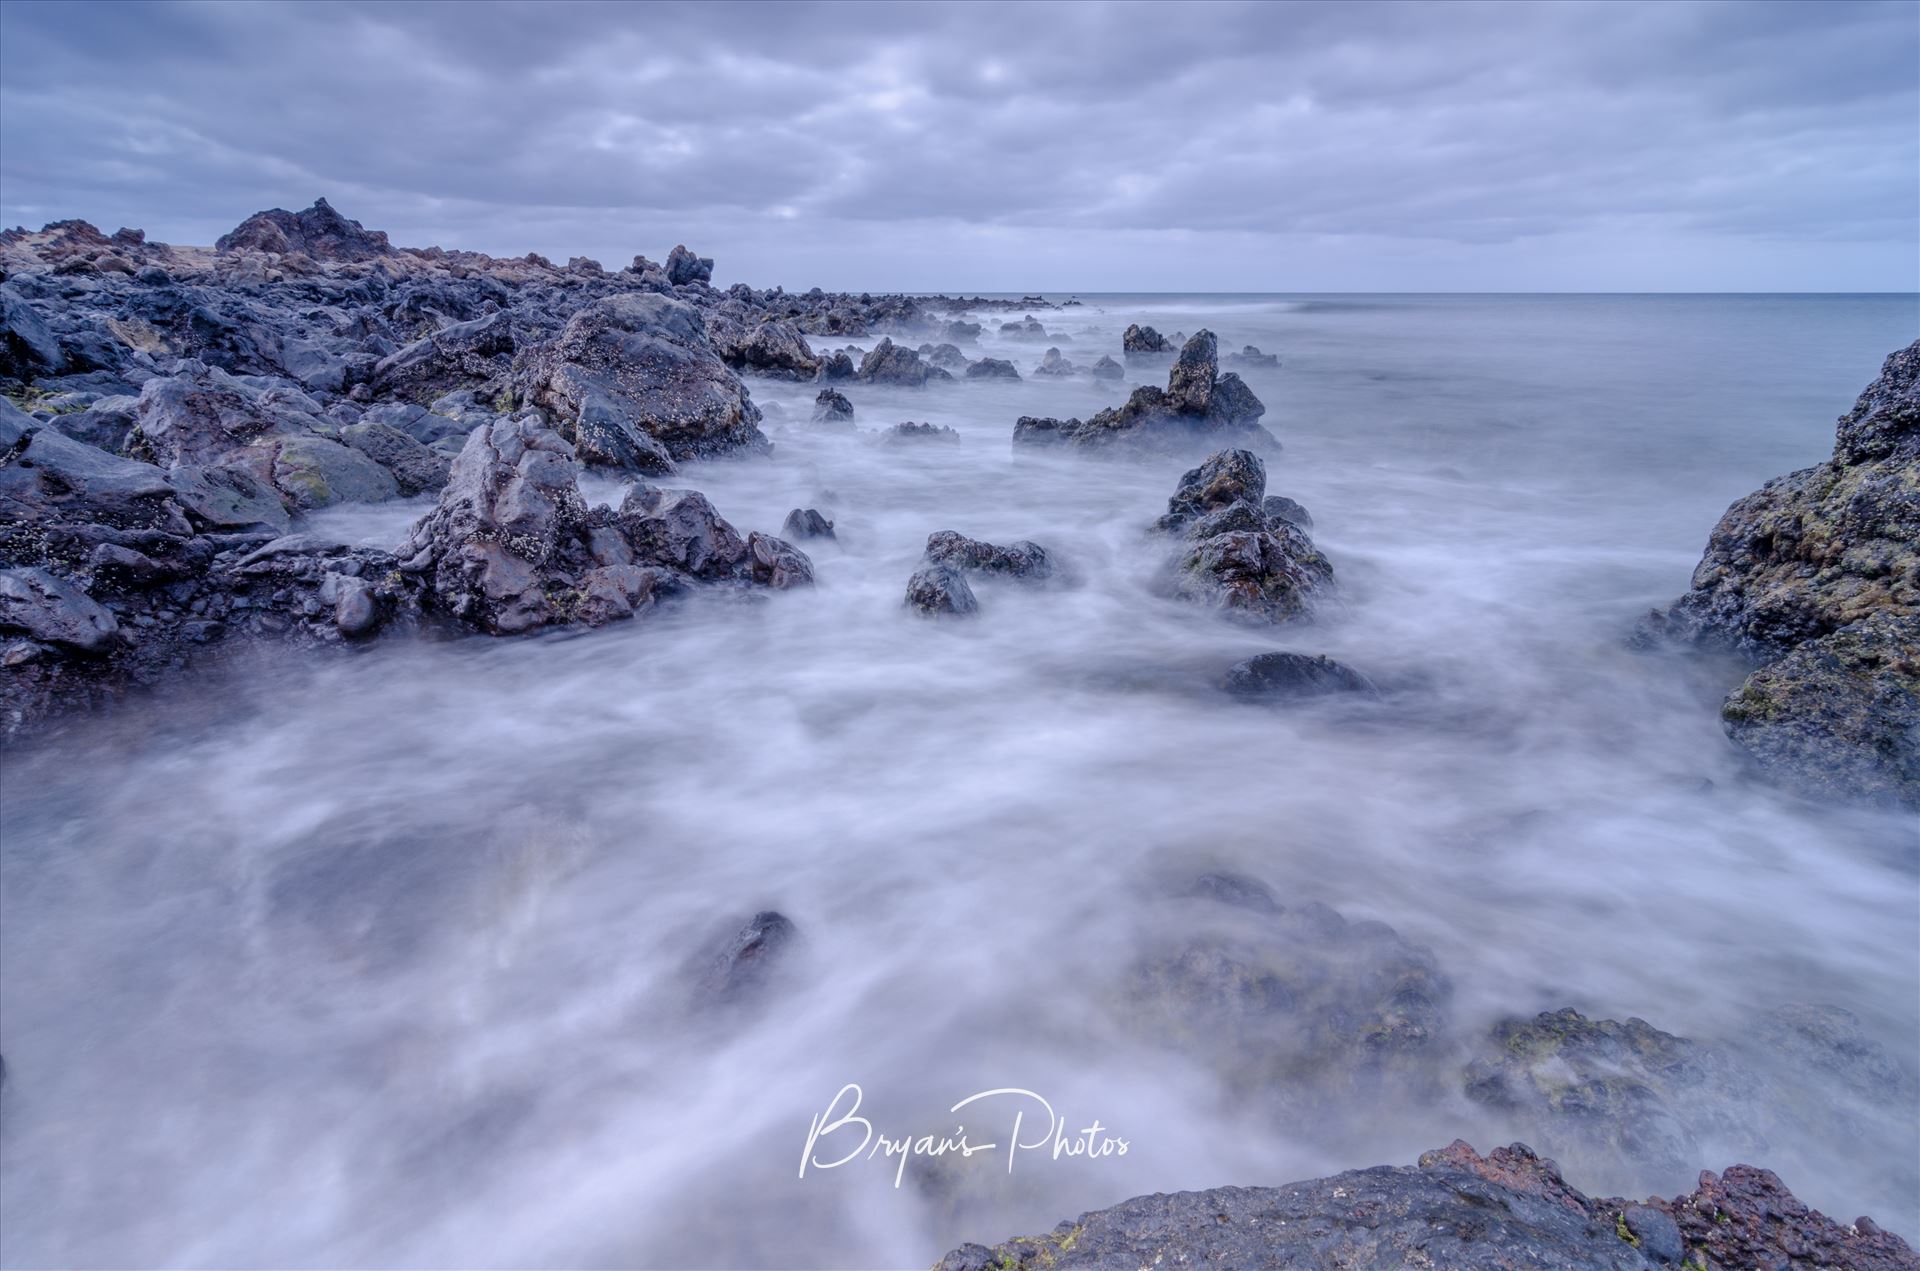 Lanzarote Seascape A photograph taken from the beach at Los Piccolos Lanzarote looking out over the Atlantic Ocean. by Bryans Photos